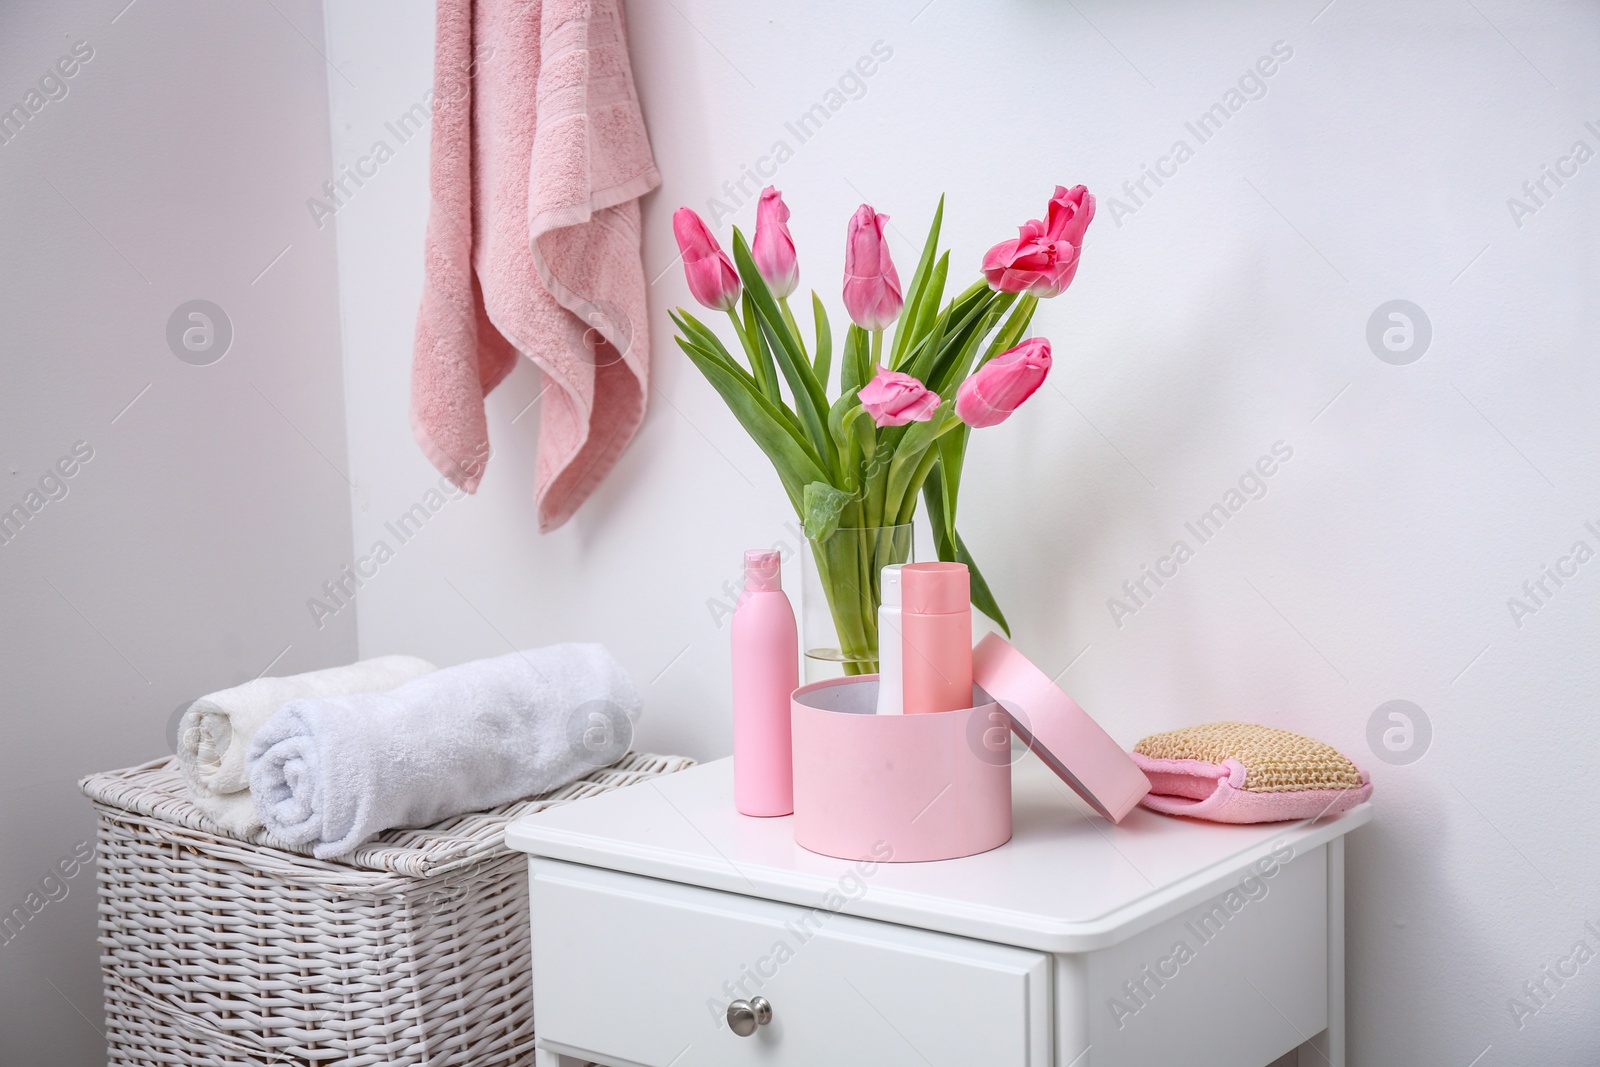 Photo of Fresh tulips and toiletries on cabinet in bathroom